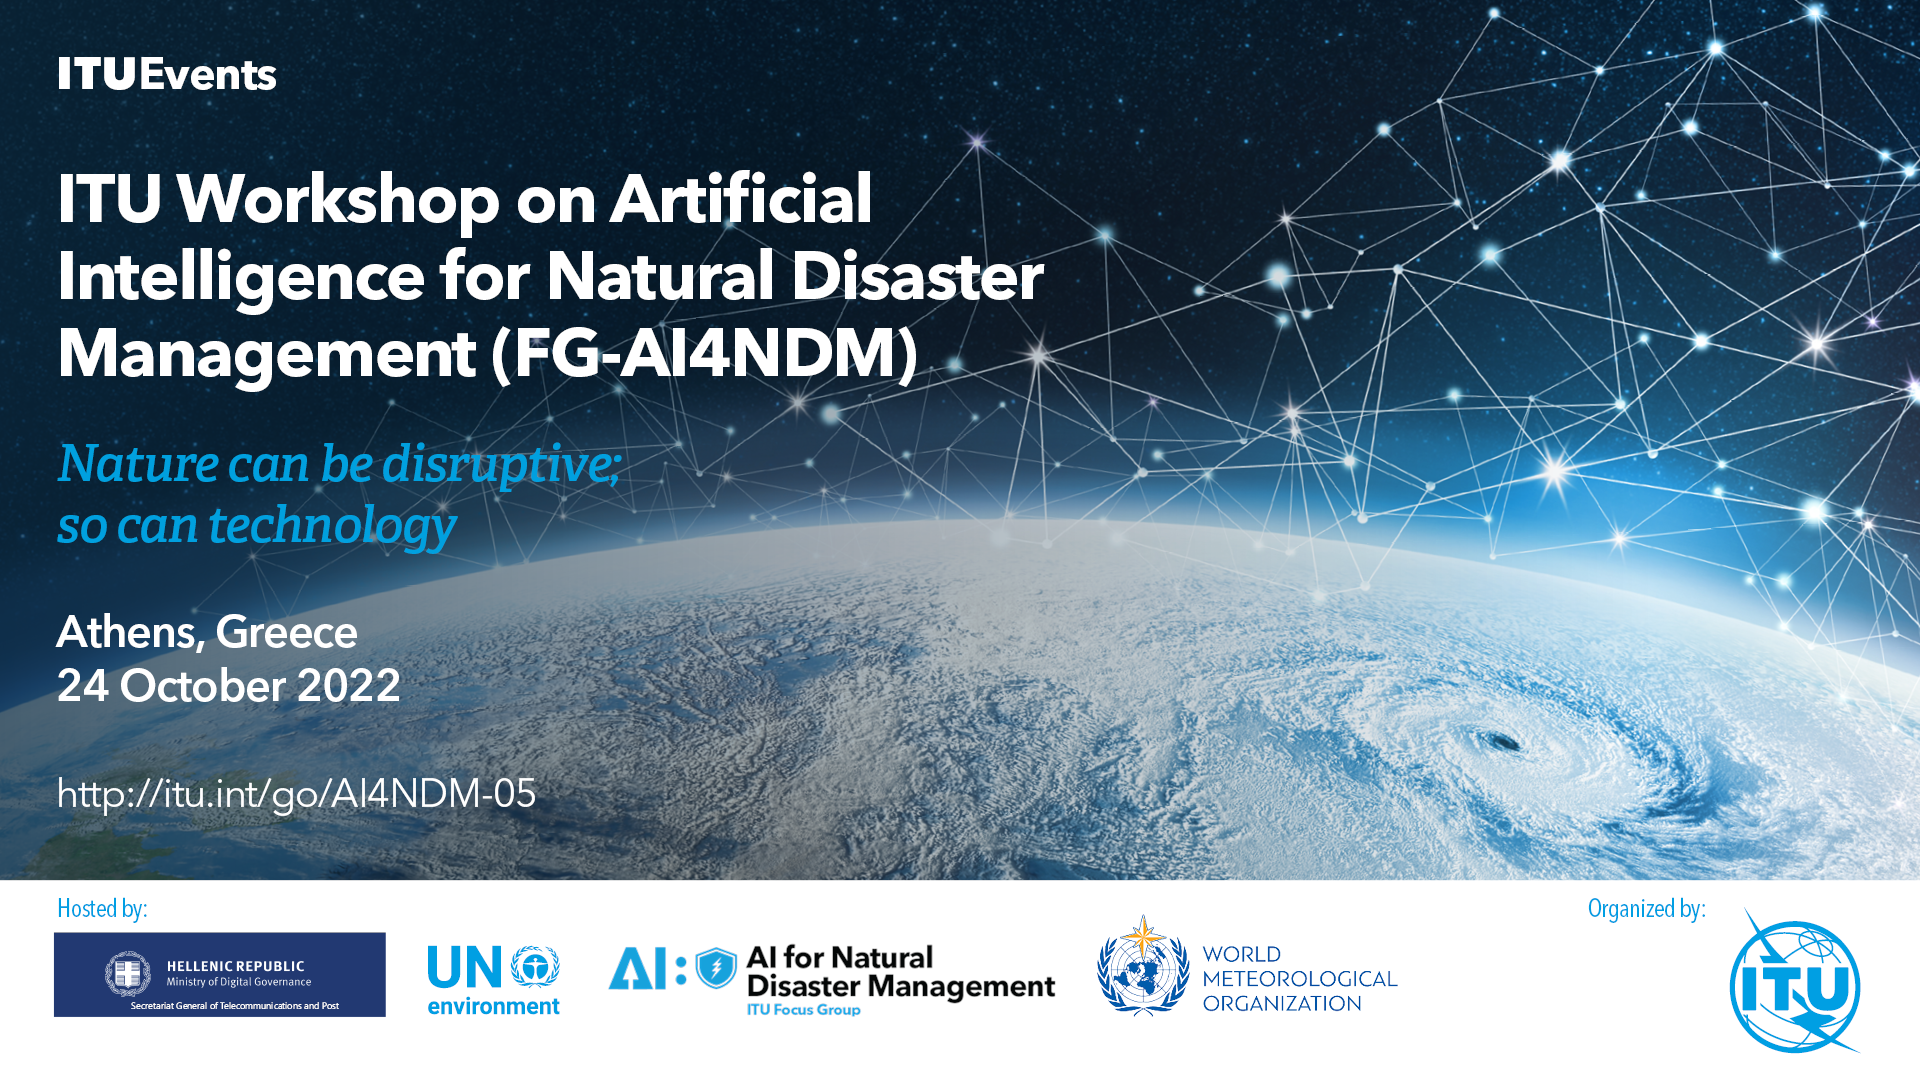 ITU /WMO/UNEP Workshop on Artificial Intelligence for Natural Disaster Management